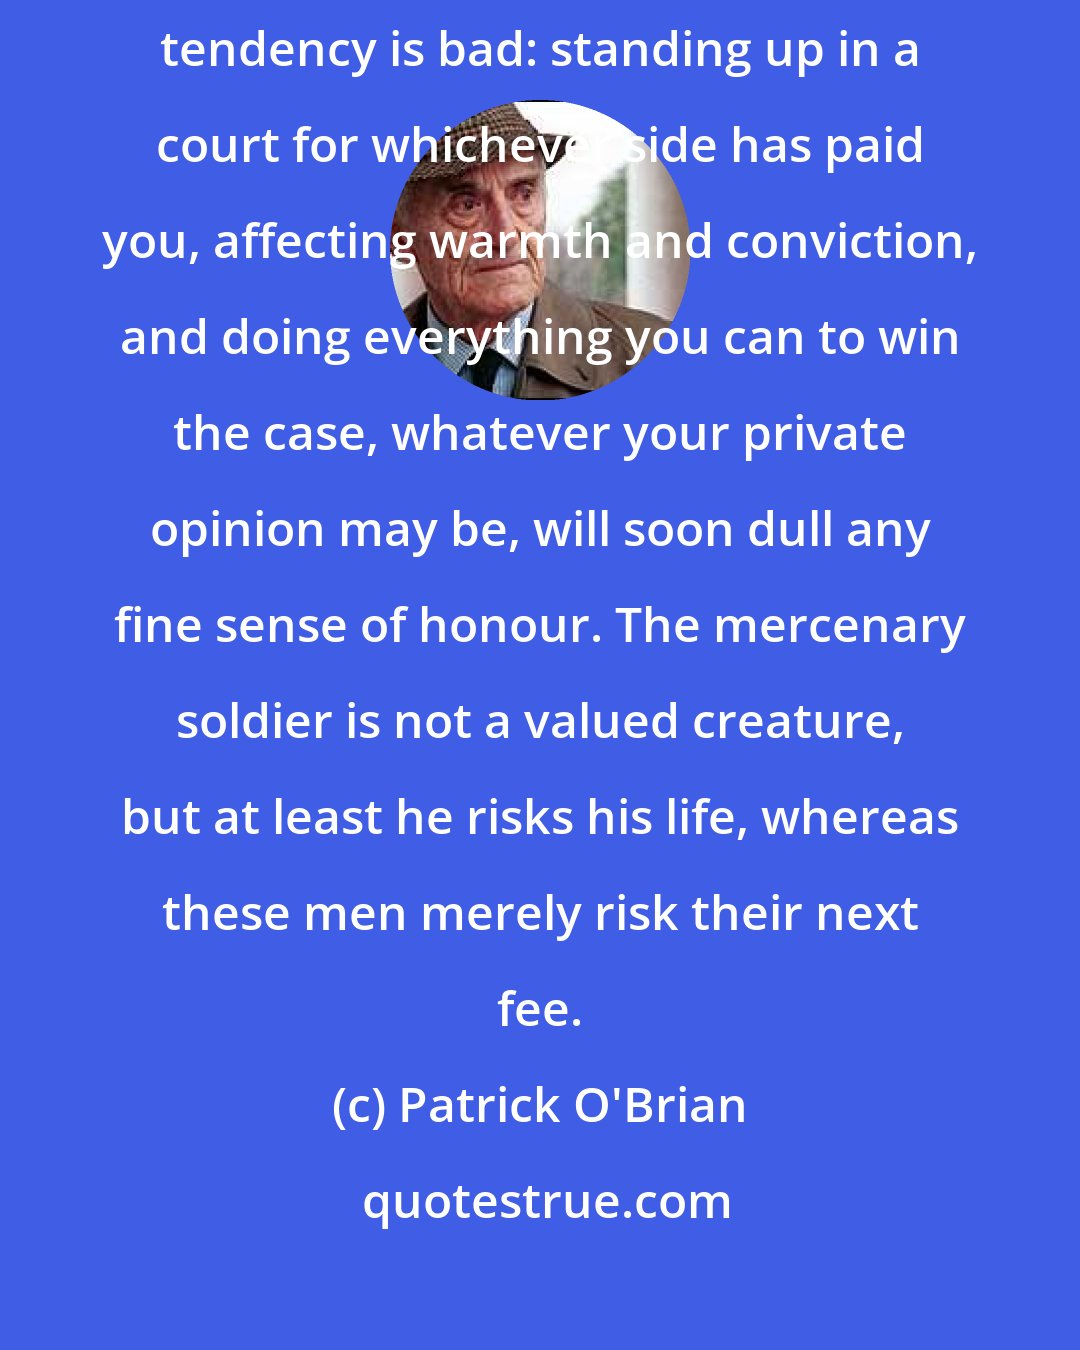 Patrick O'Brian: I do not say that all lawyers are bad, but I do maintain that the general tendency is bad: standing up in a court for whichever side has paid you, affecting warmth and conviction, and doing everything you can to win the case, whatever your private opinion may be, will soon dull any fine sense of honour. The mercenary soldier is not a valued creature, but at least he risks his life, whereas these men merely risk their next fee.